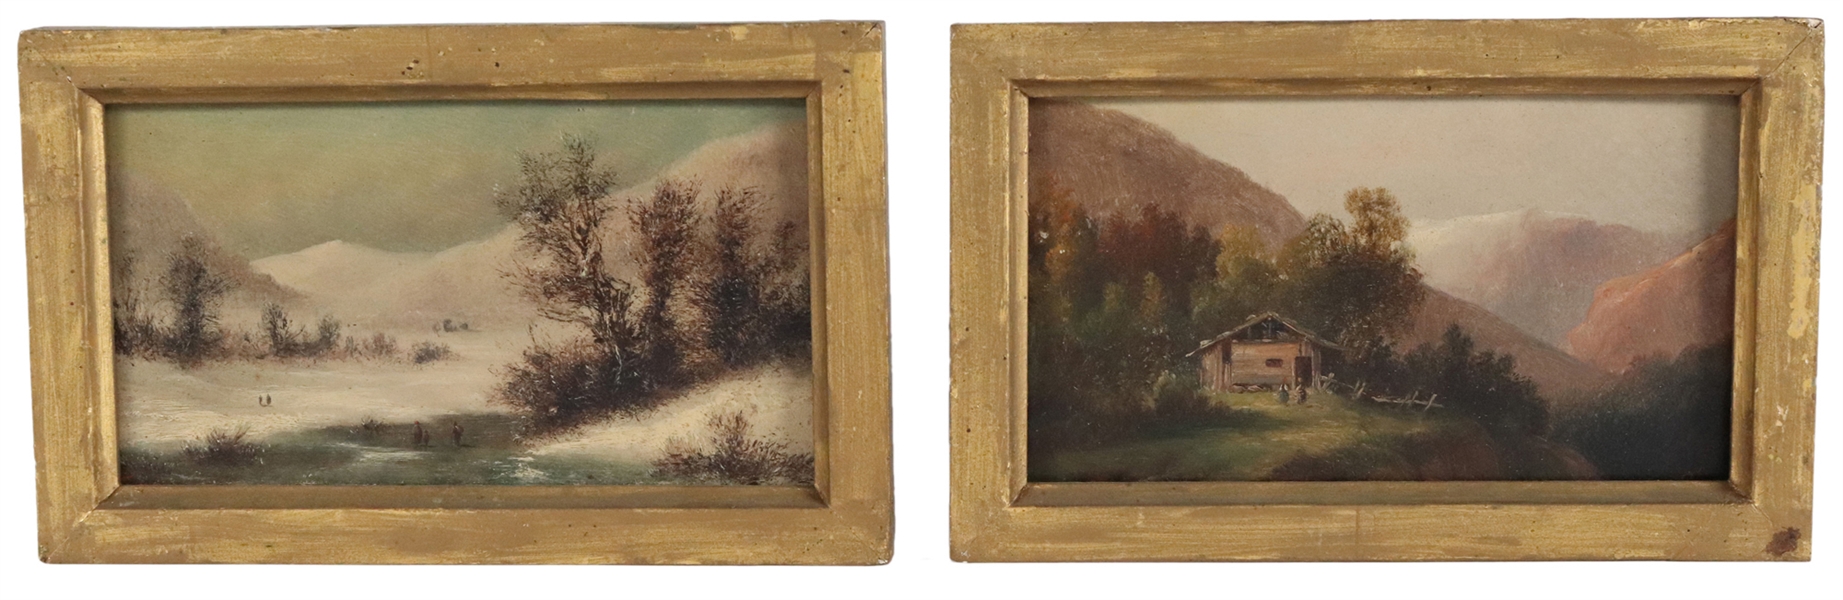 Two Small Oil on Board Landscapes